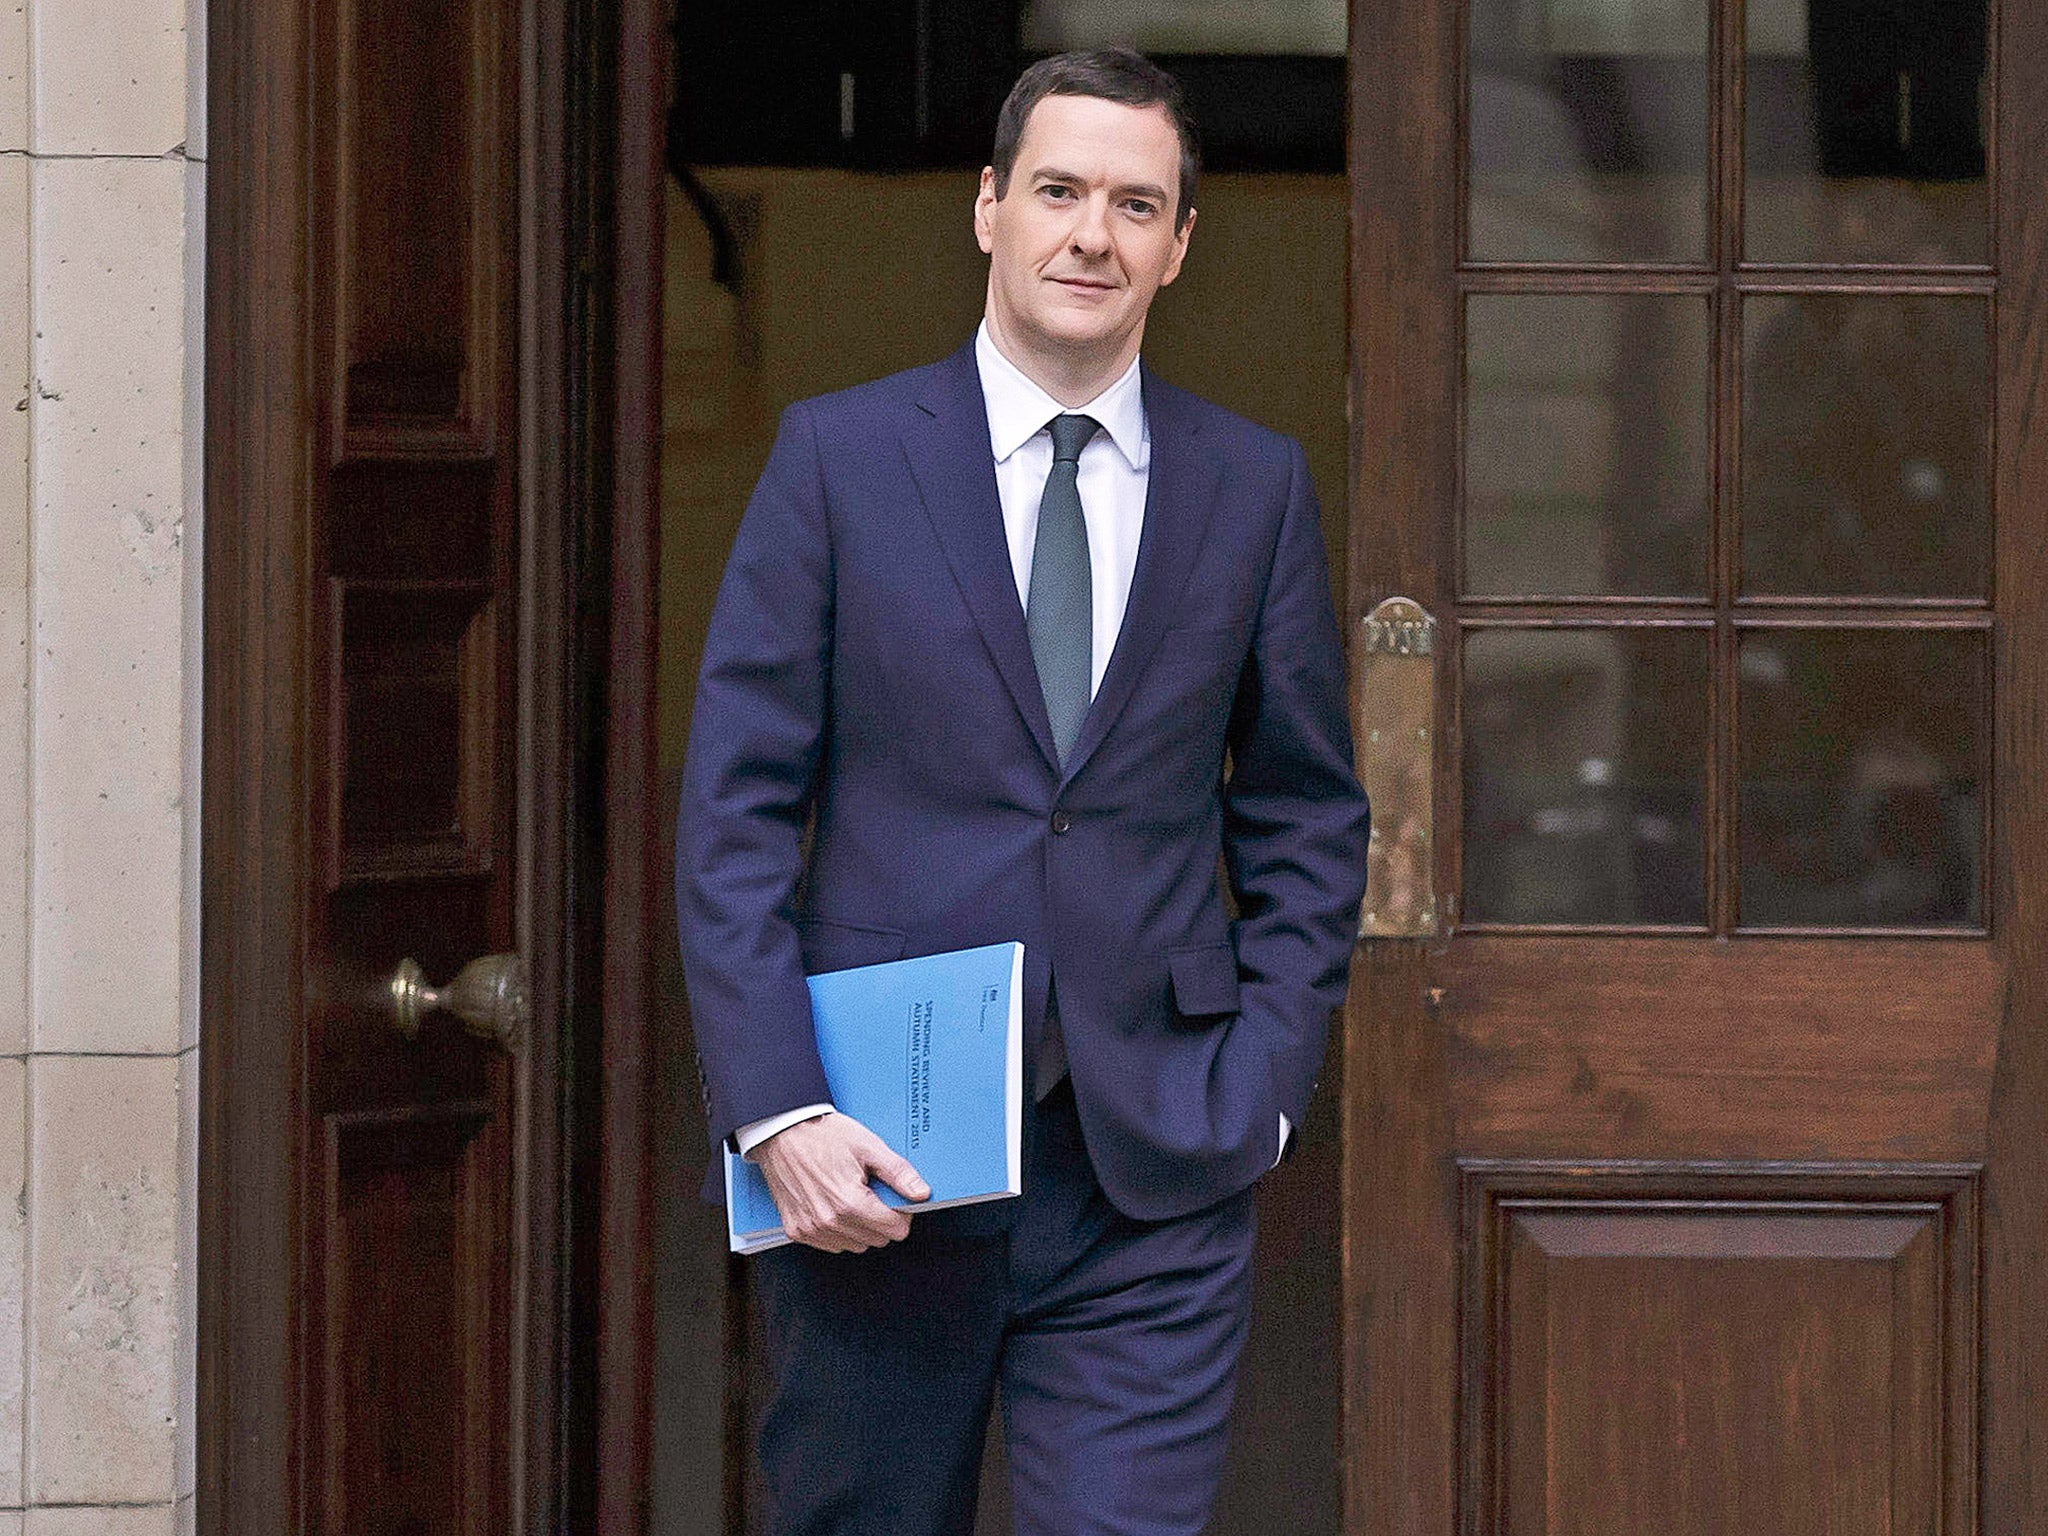 Were the one year Pensioner Bonds Osborne's attempt to buy votes?